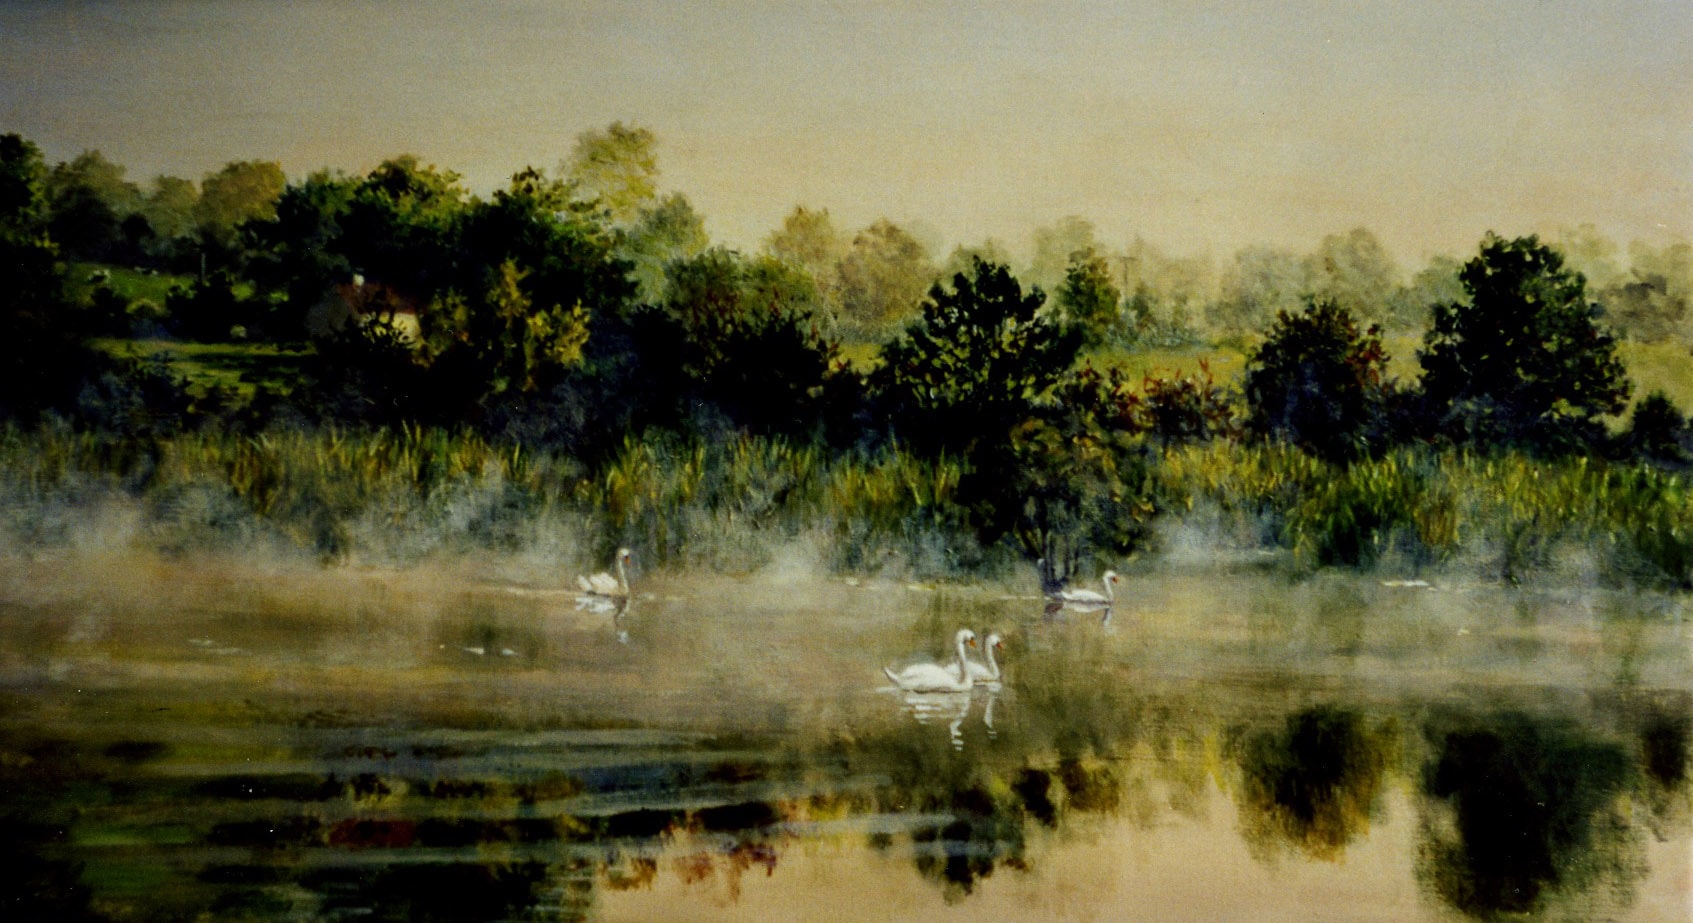 Two Swans on the Bandon River 1987 Oil on Panel 16 x 20